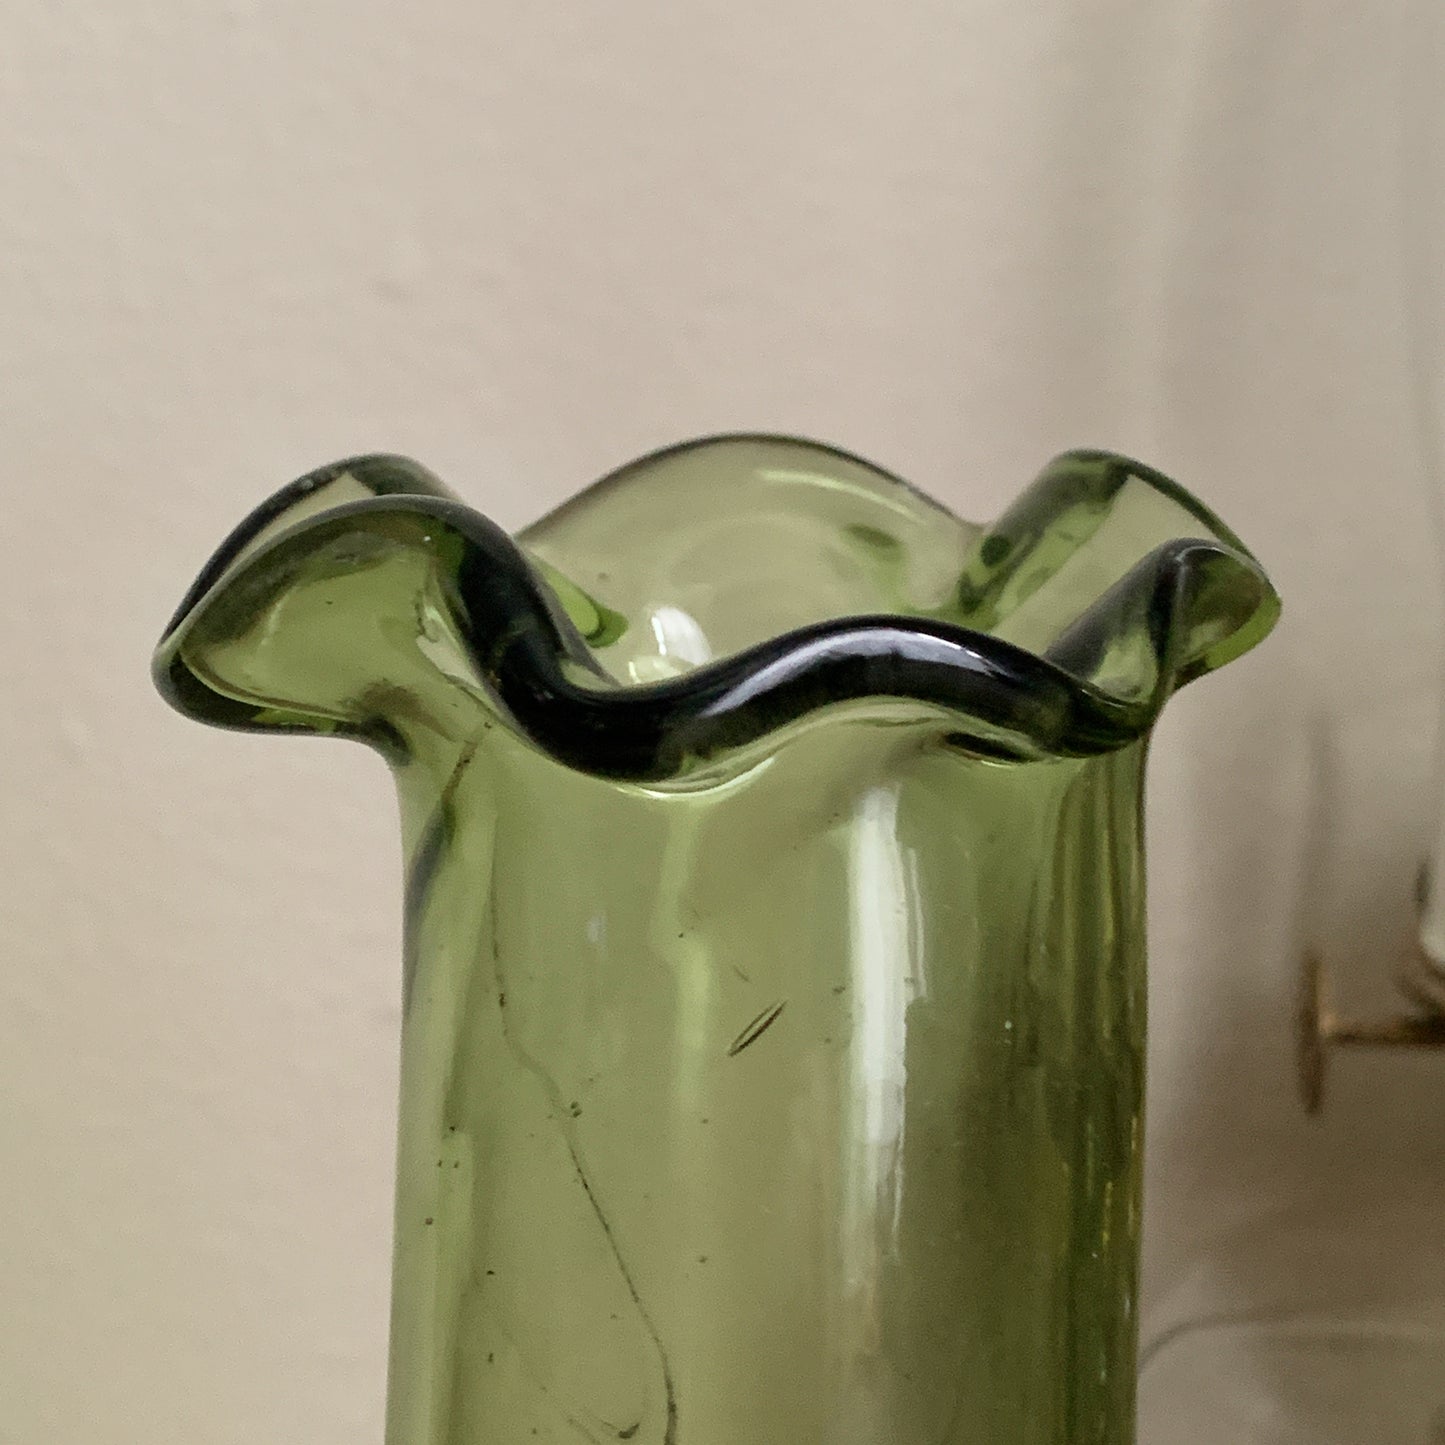 Green Blown Glass Vase, Small Glass Bud Vase with Ruffle